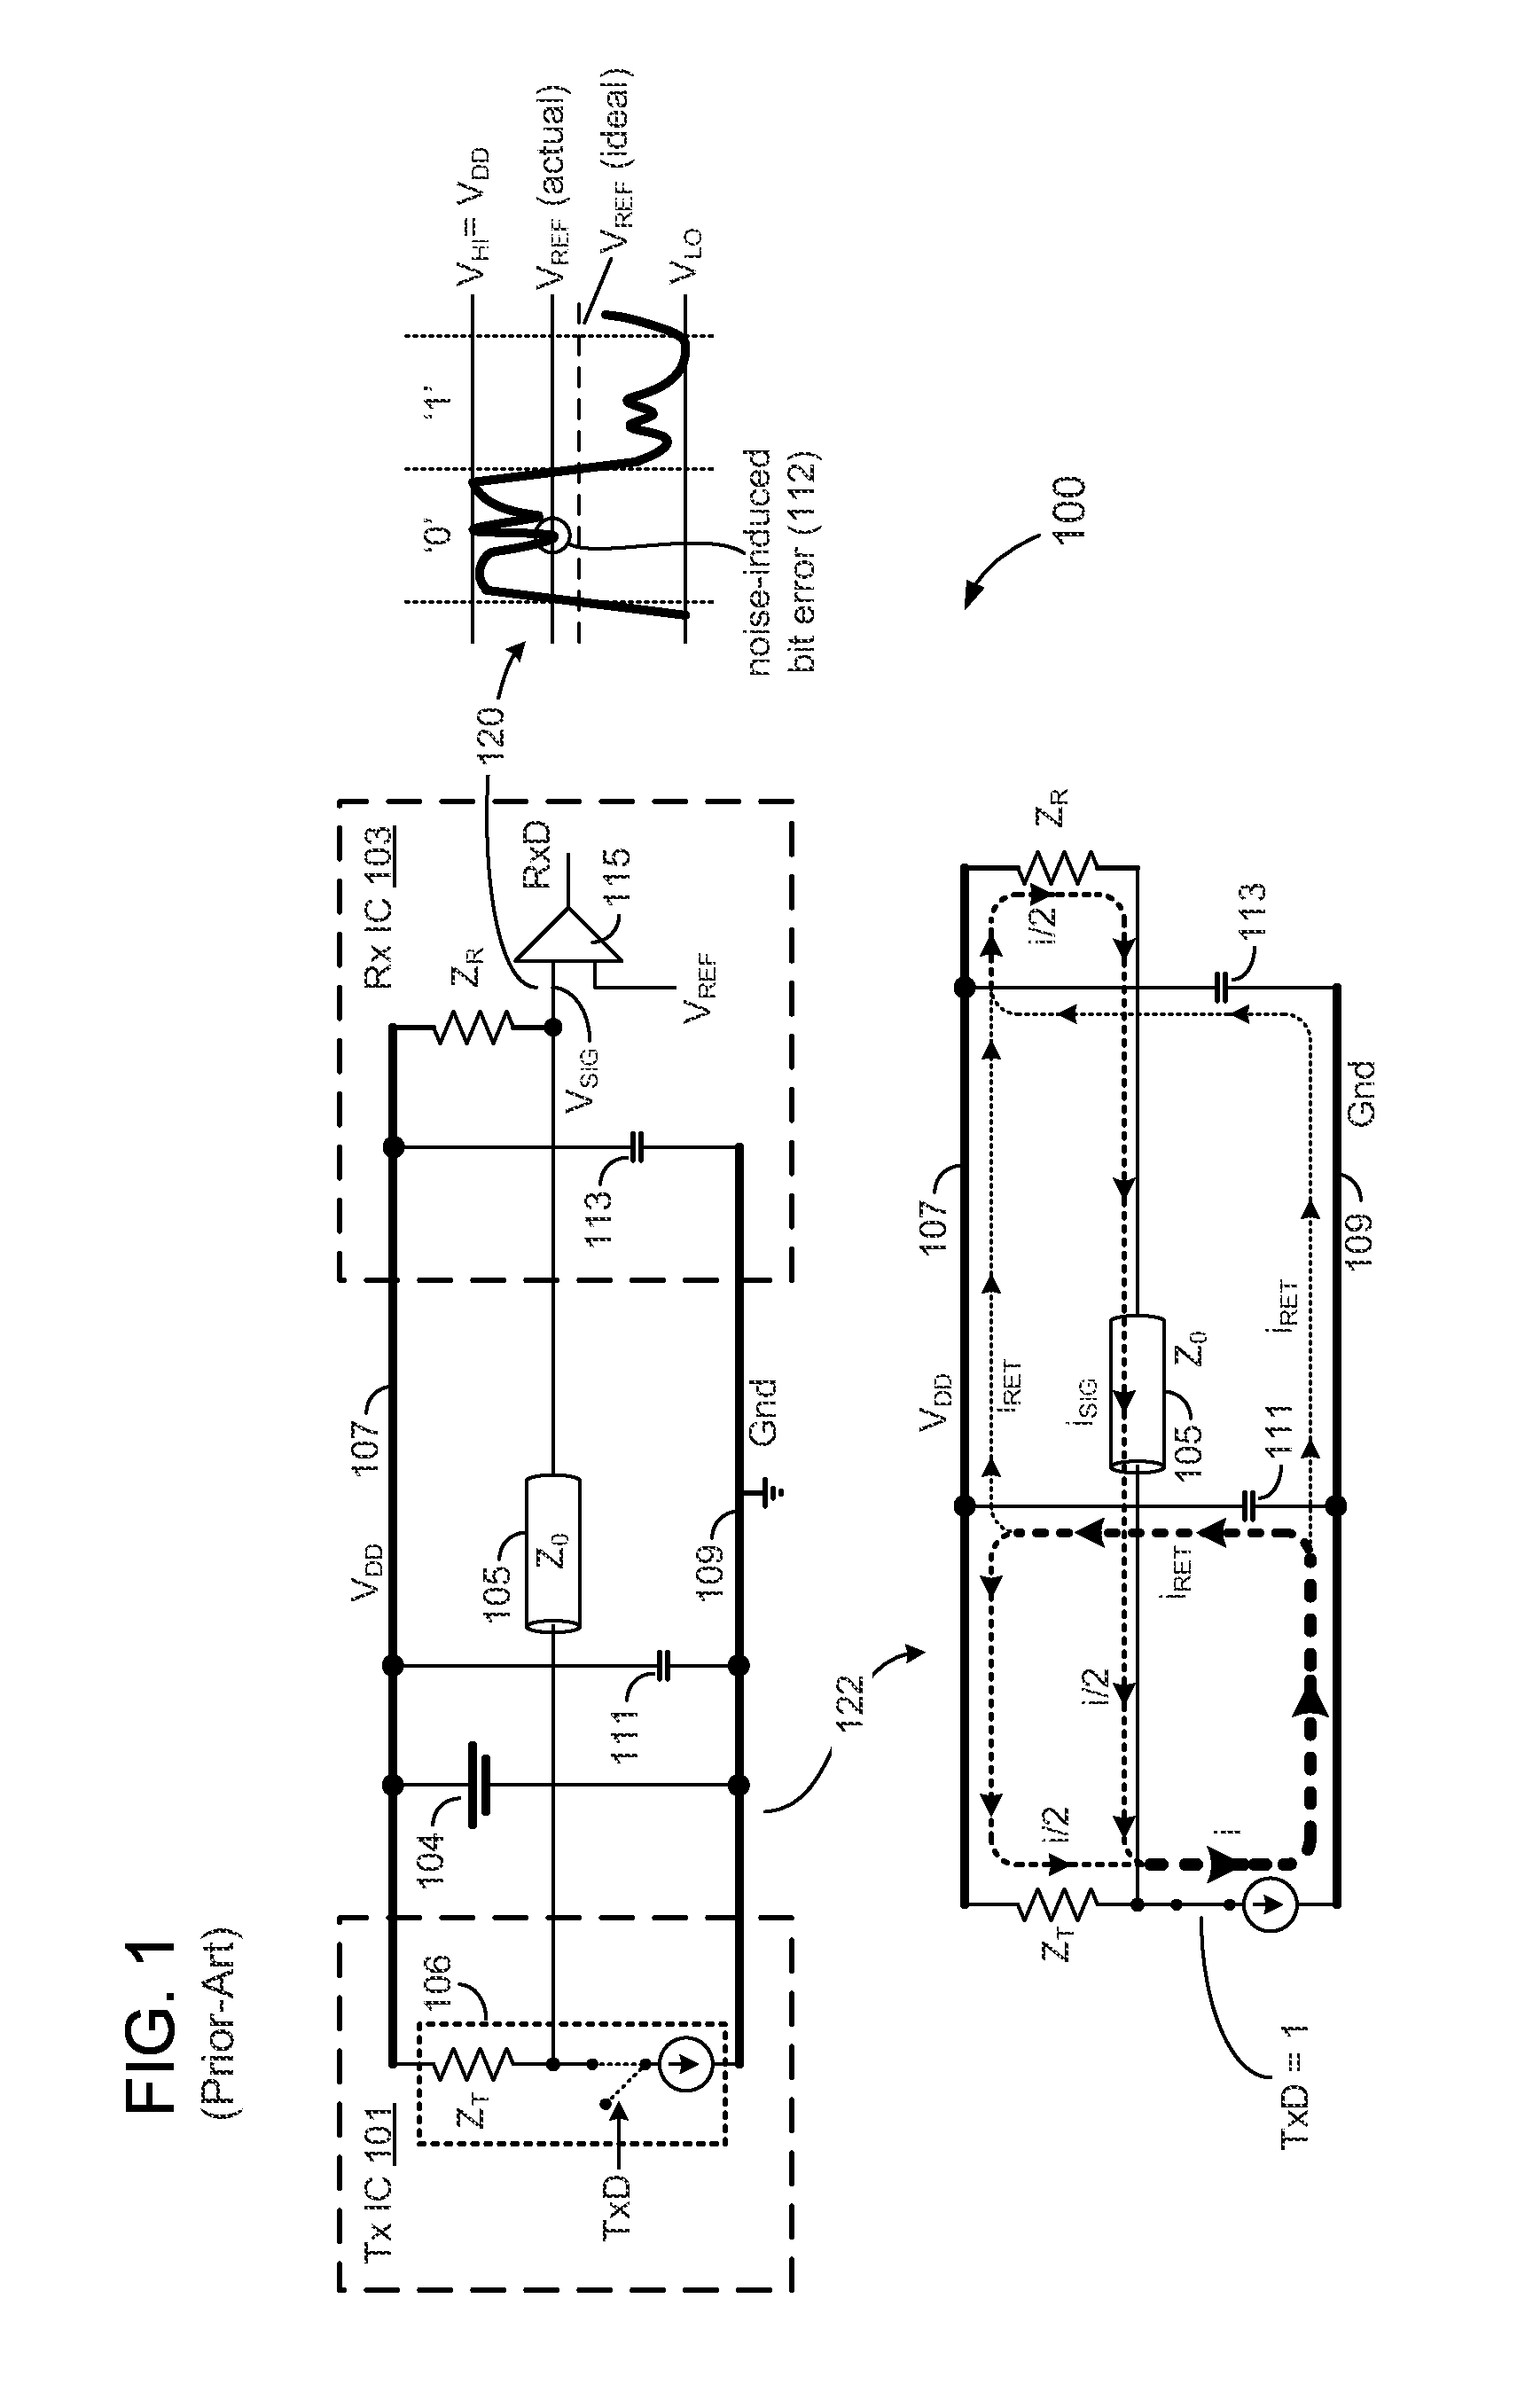 Single-ended signaling with parallel transmit and return current flow